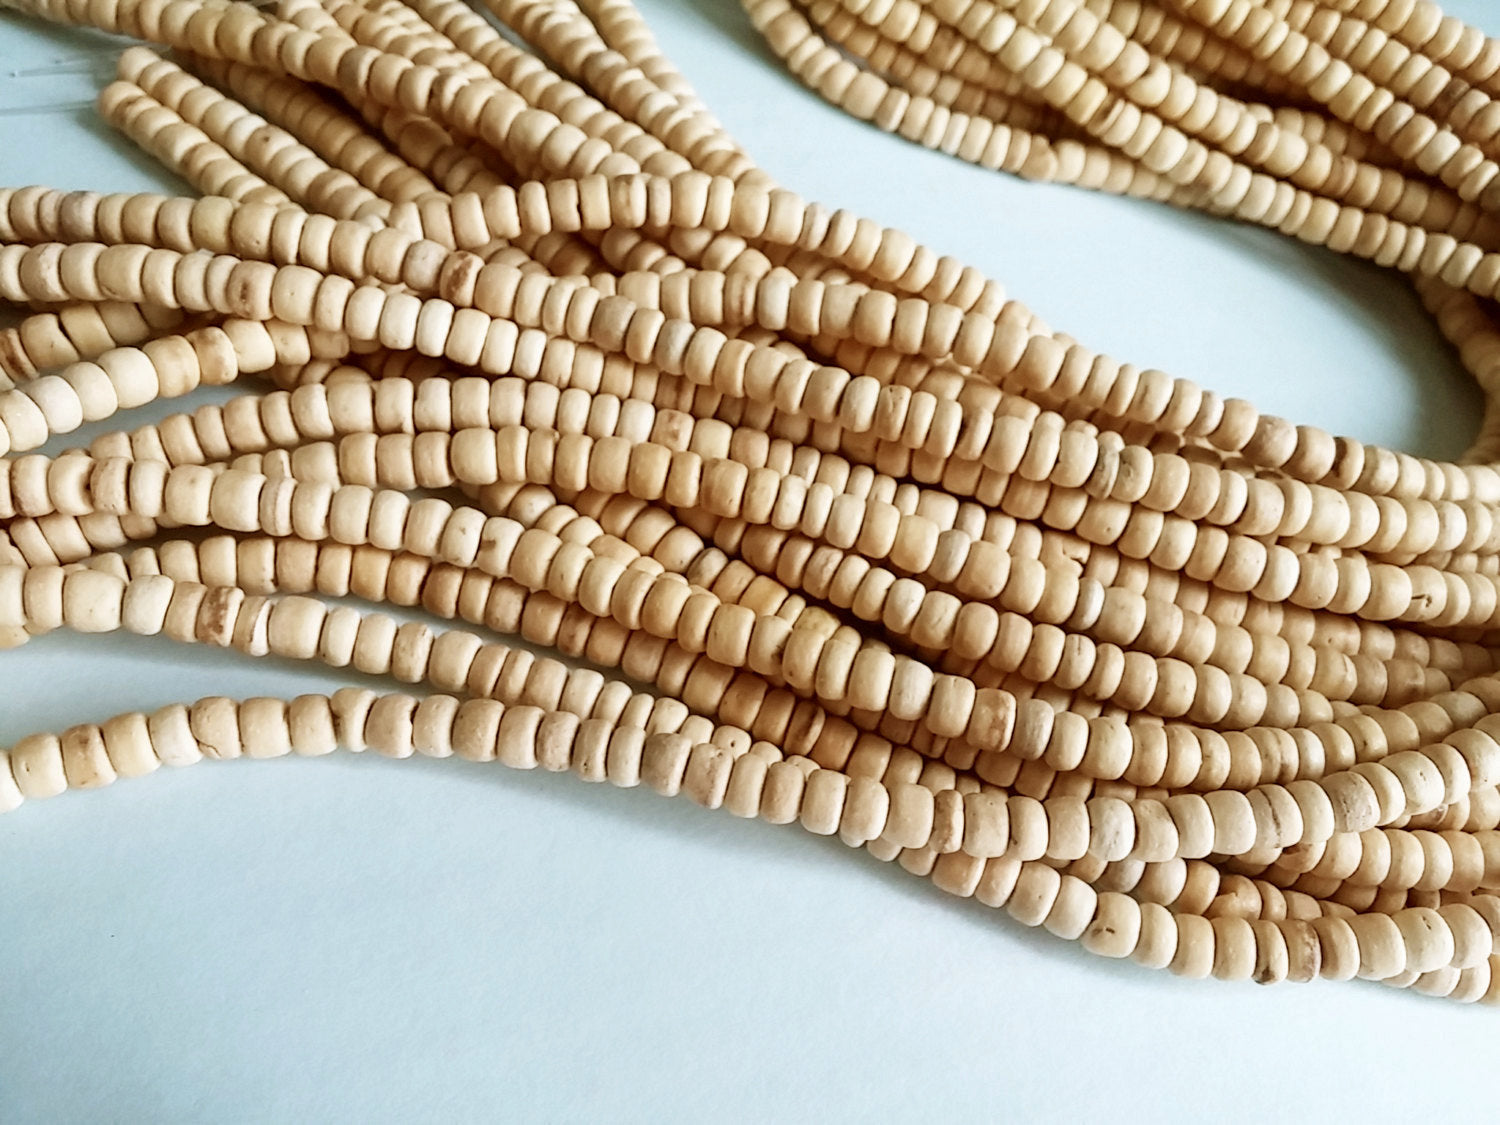 120 natural coconut beads - Coconut Rondelle Disk Beads 4-5mm